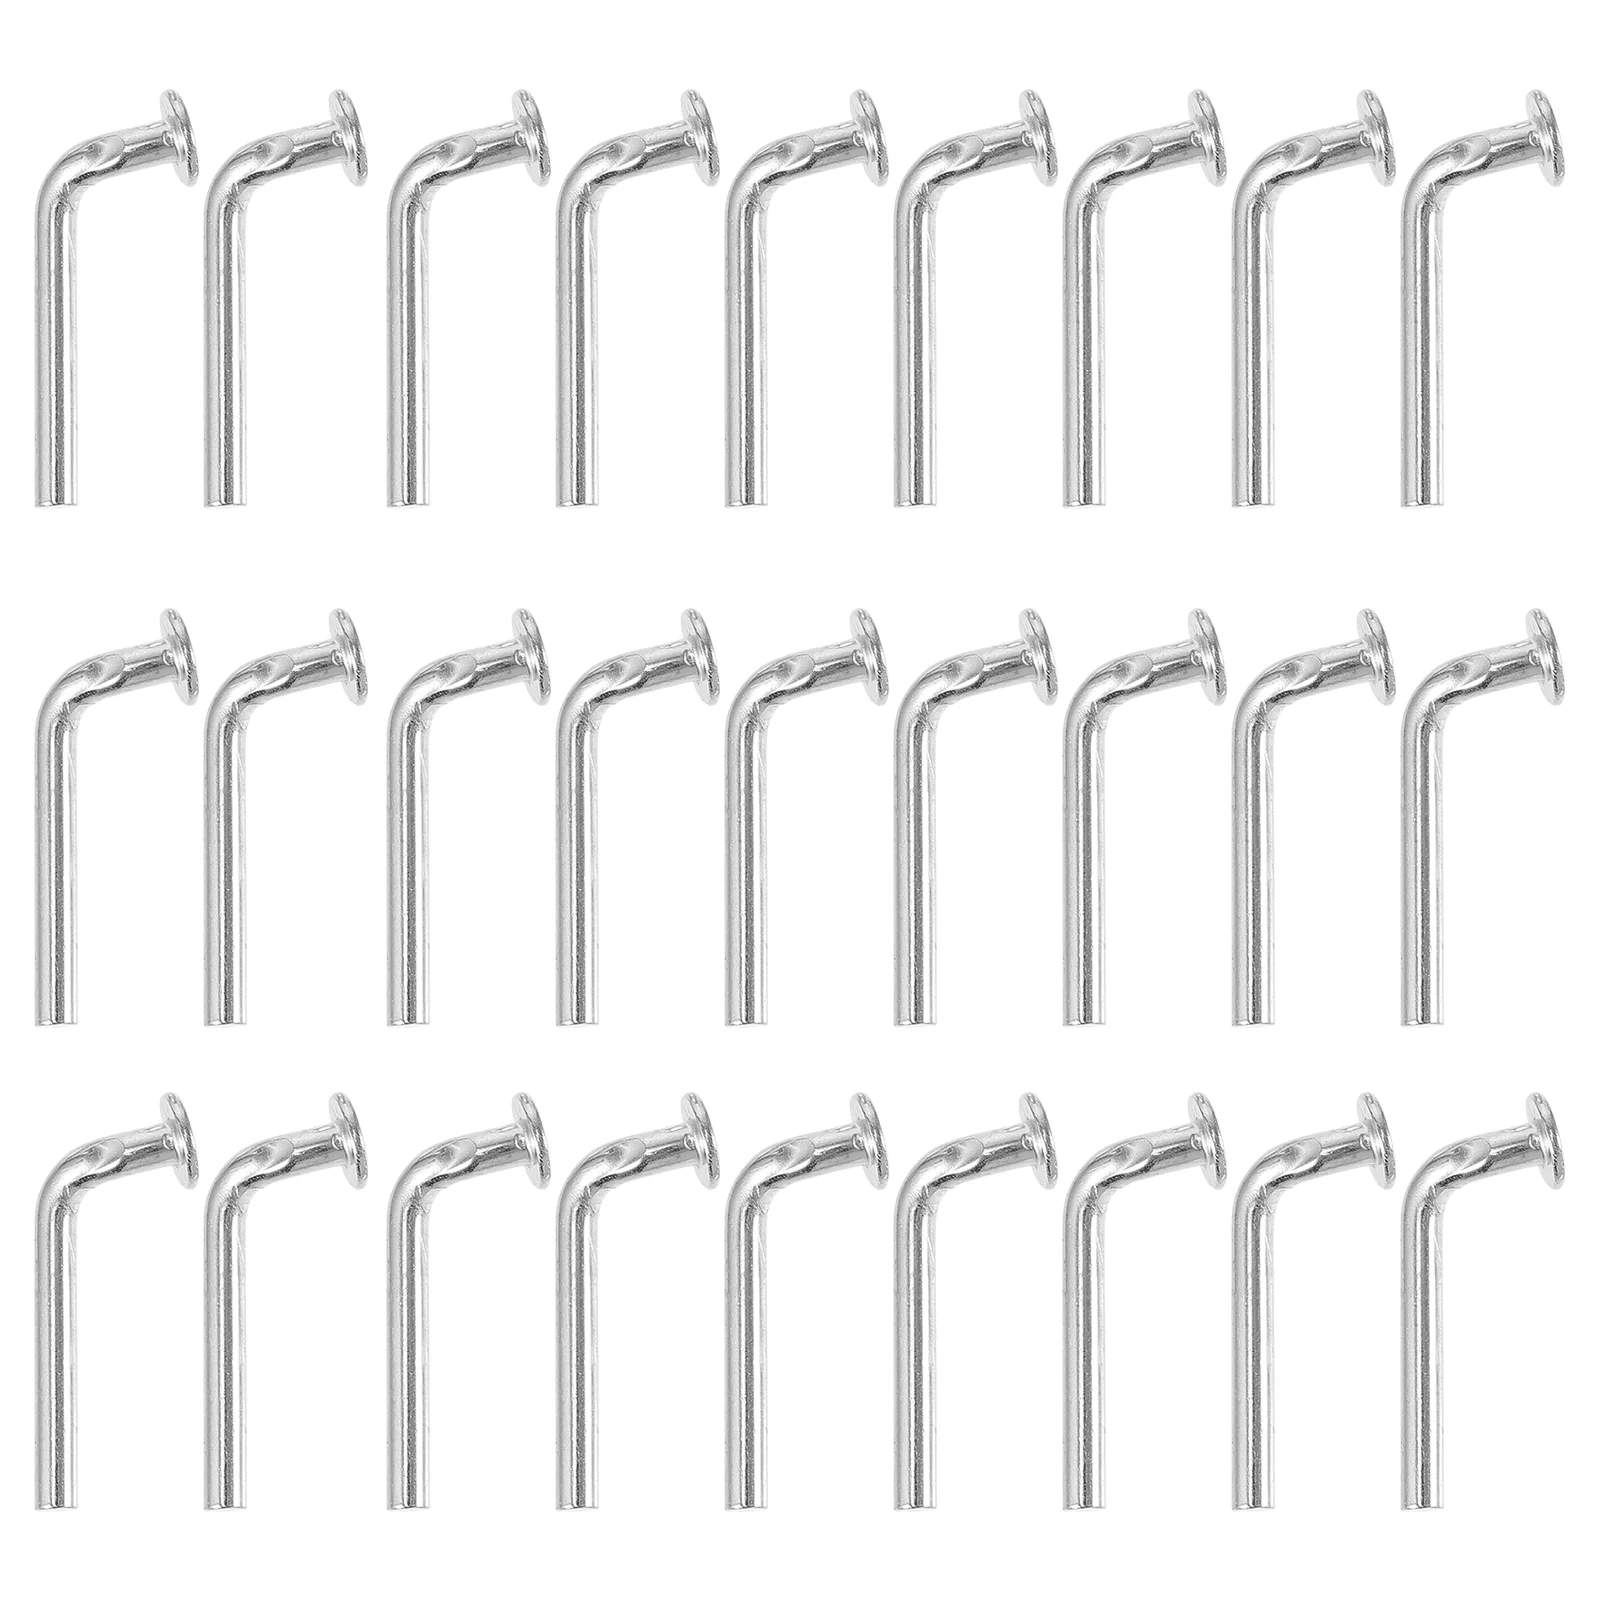 

100pcs Pallet Rack Drop Pin Heavy Duty Safety Pin for DIY Shelving Project